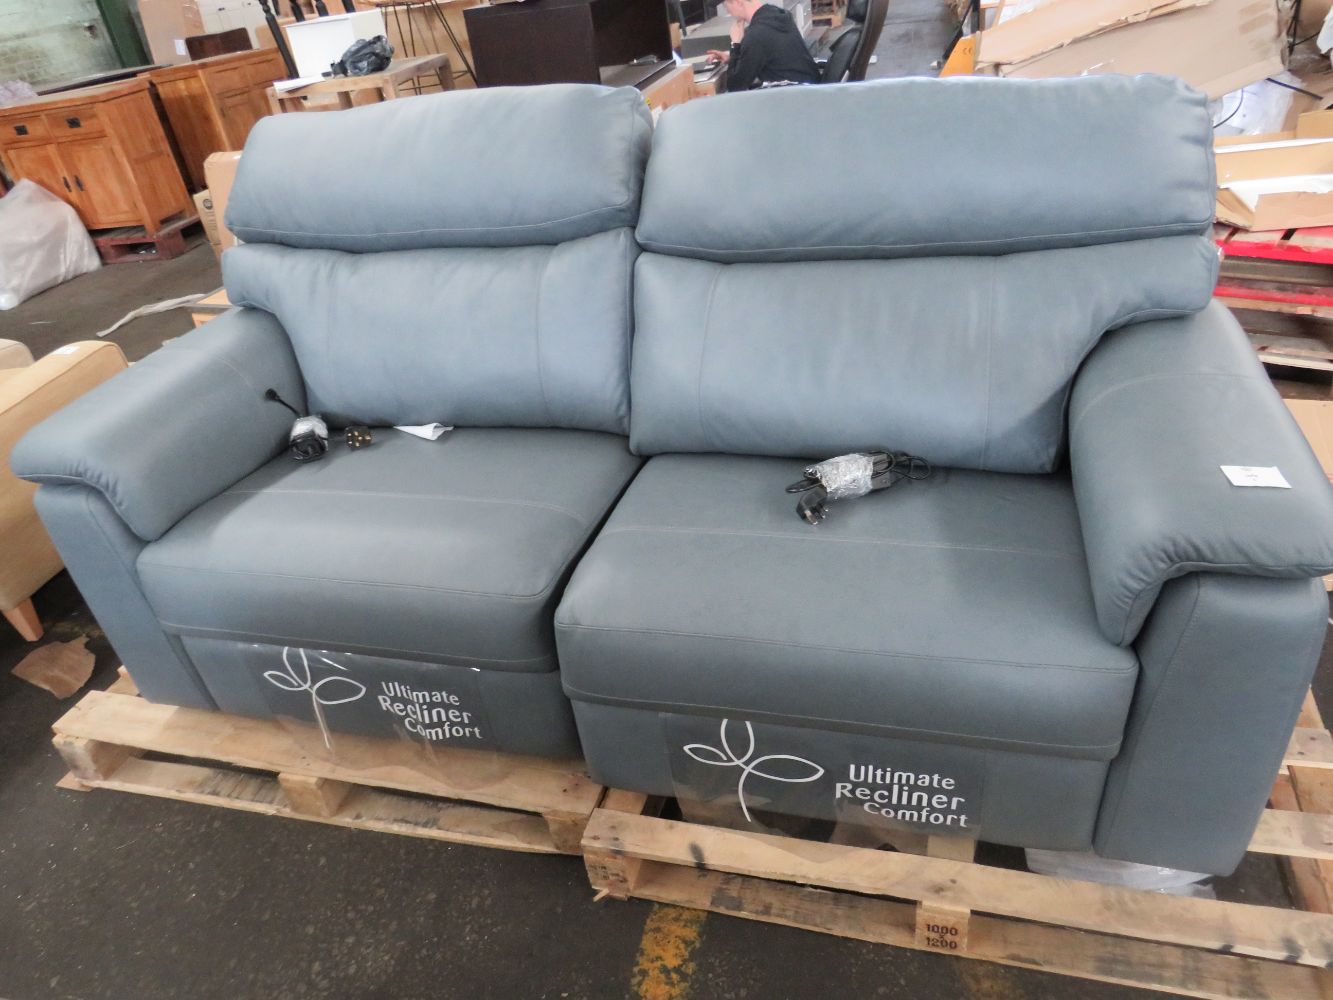 Sofas & Chairs from Swoon, Heals, Oak Furniturland, Costco and more at low prices.